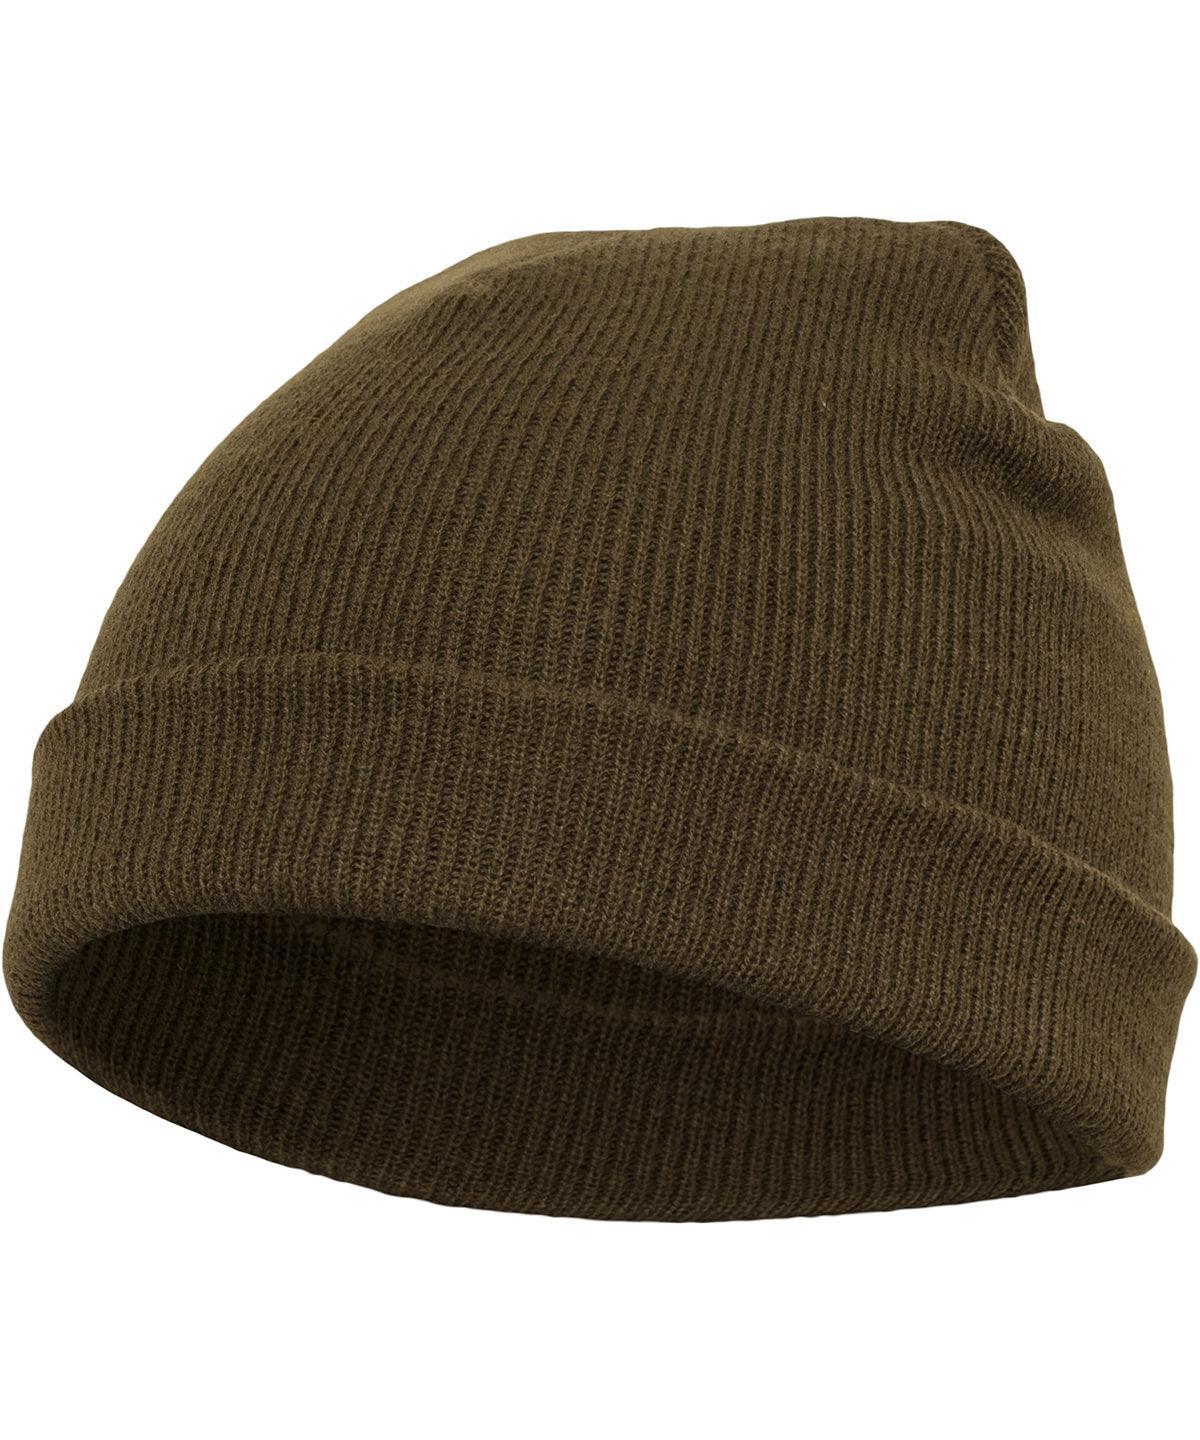 Olive - Heavyweight beanie (1500KC) Hats Flexfit by Yupoong Headwear, New Colours for 2023, Winter Essentials Schoolwear Centres